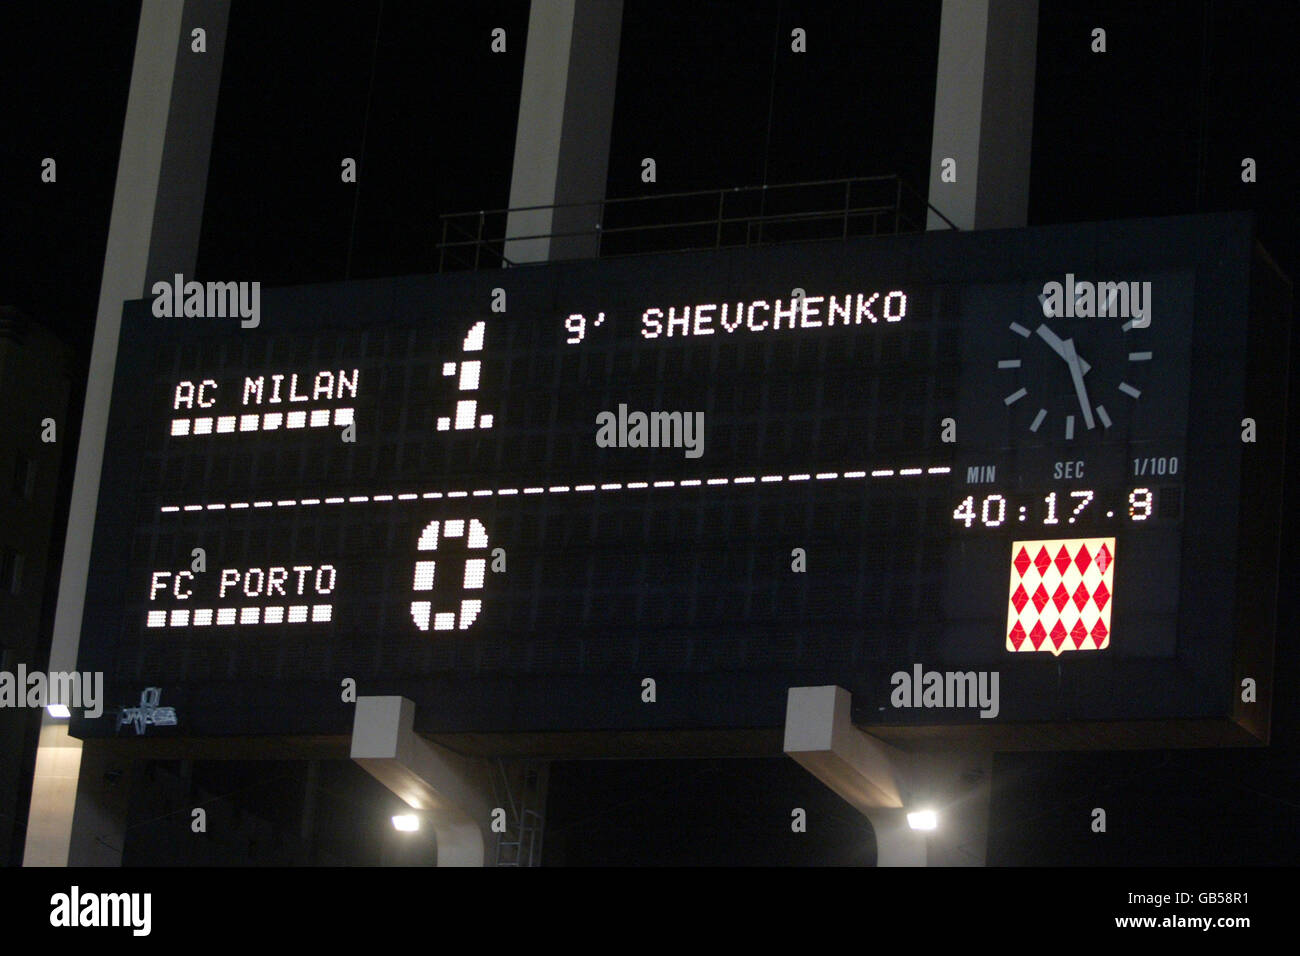 Soccer - UEFA Super Cup - FC Porto v AC Milan. The scoreboard coming up to half time Stock Photo